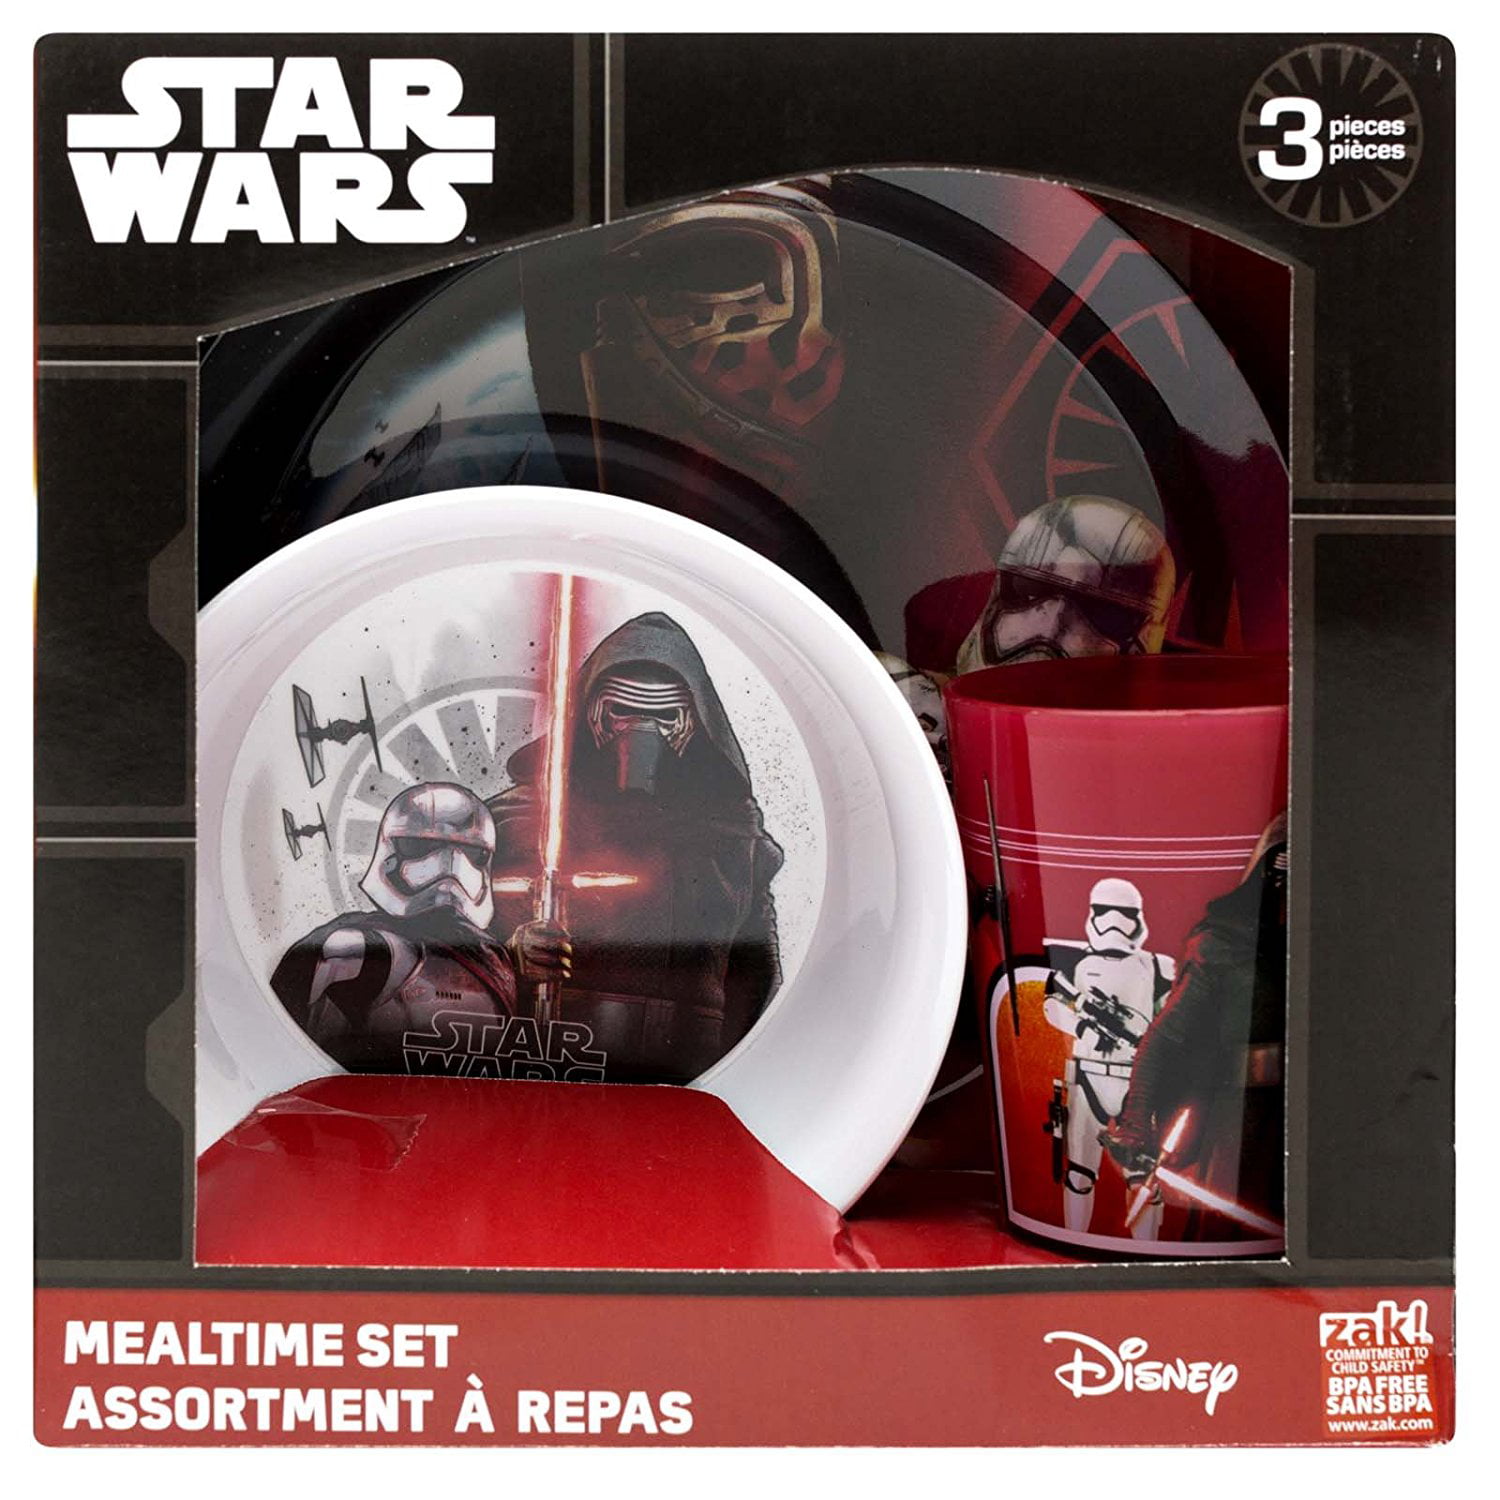 THE FORCE AWAKENS PLATE BOWL AND CUP GIFT SET ZAK DESIGNS STAR WARS 